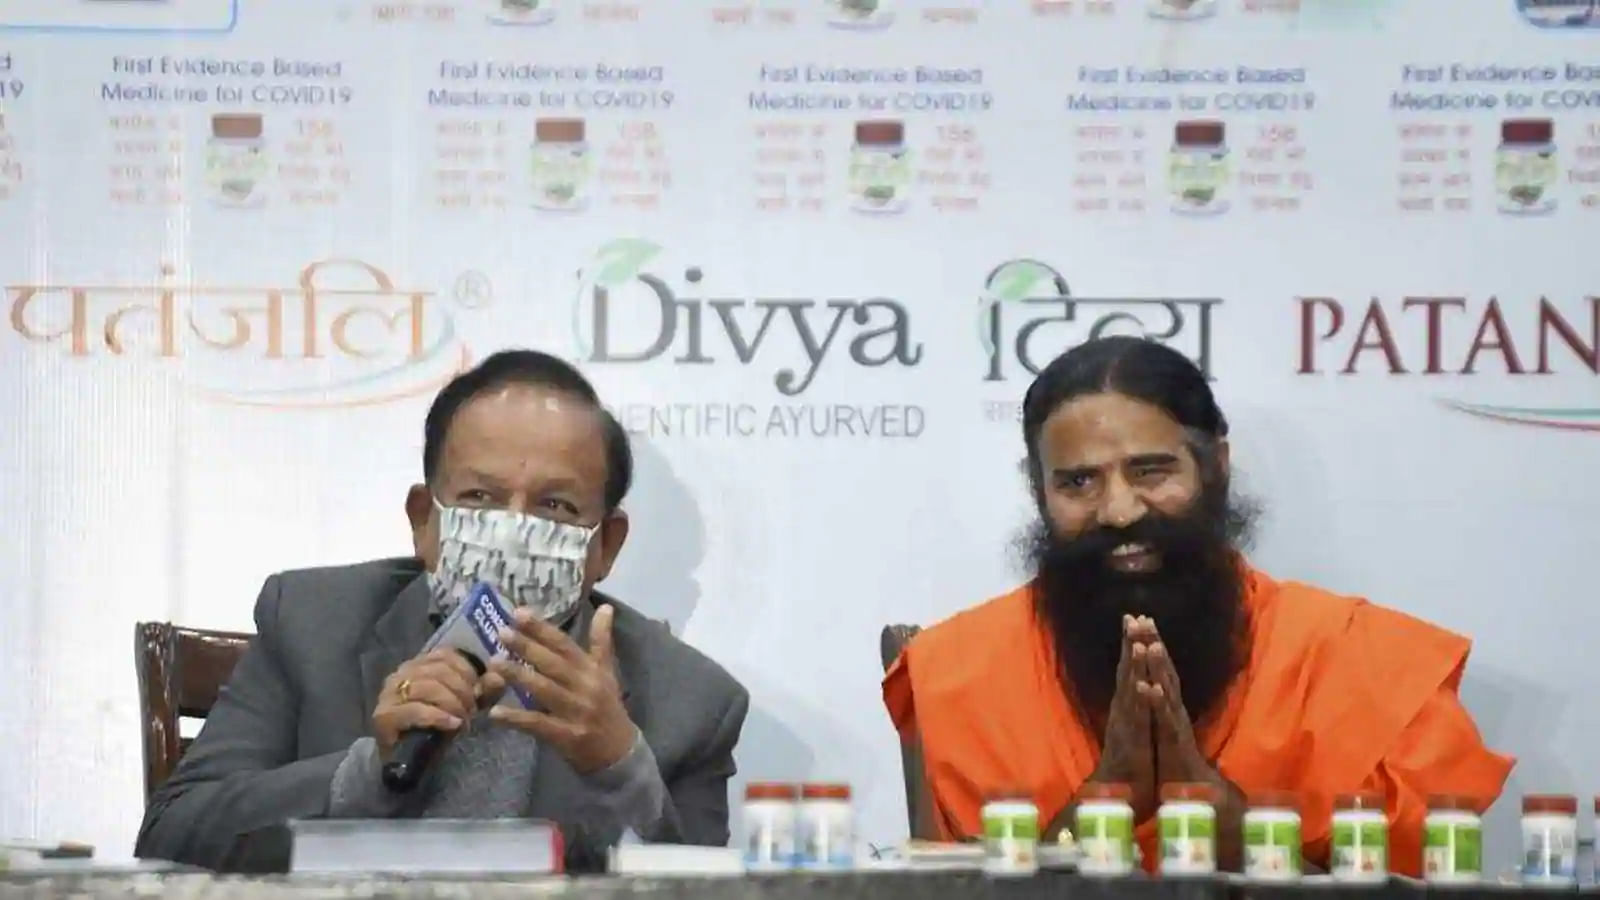 Ramdev, in his comments, claimed that “lakhs had died after taking allopathy medicines”.